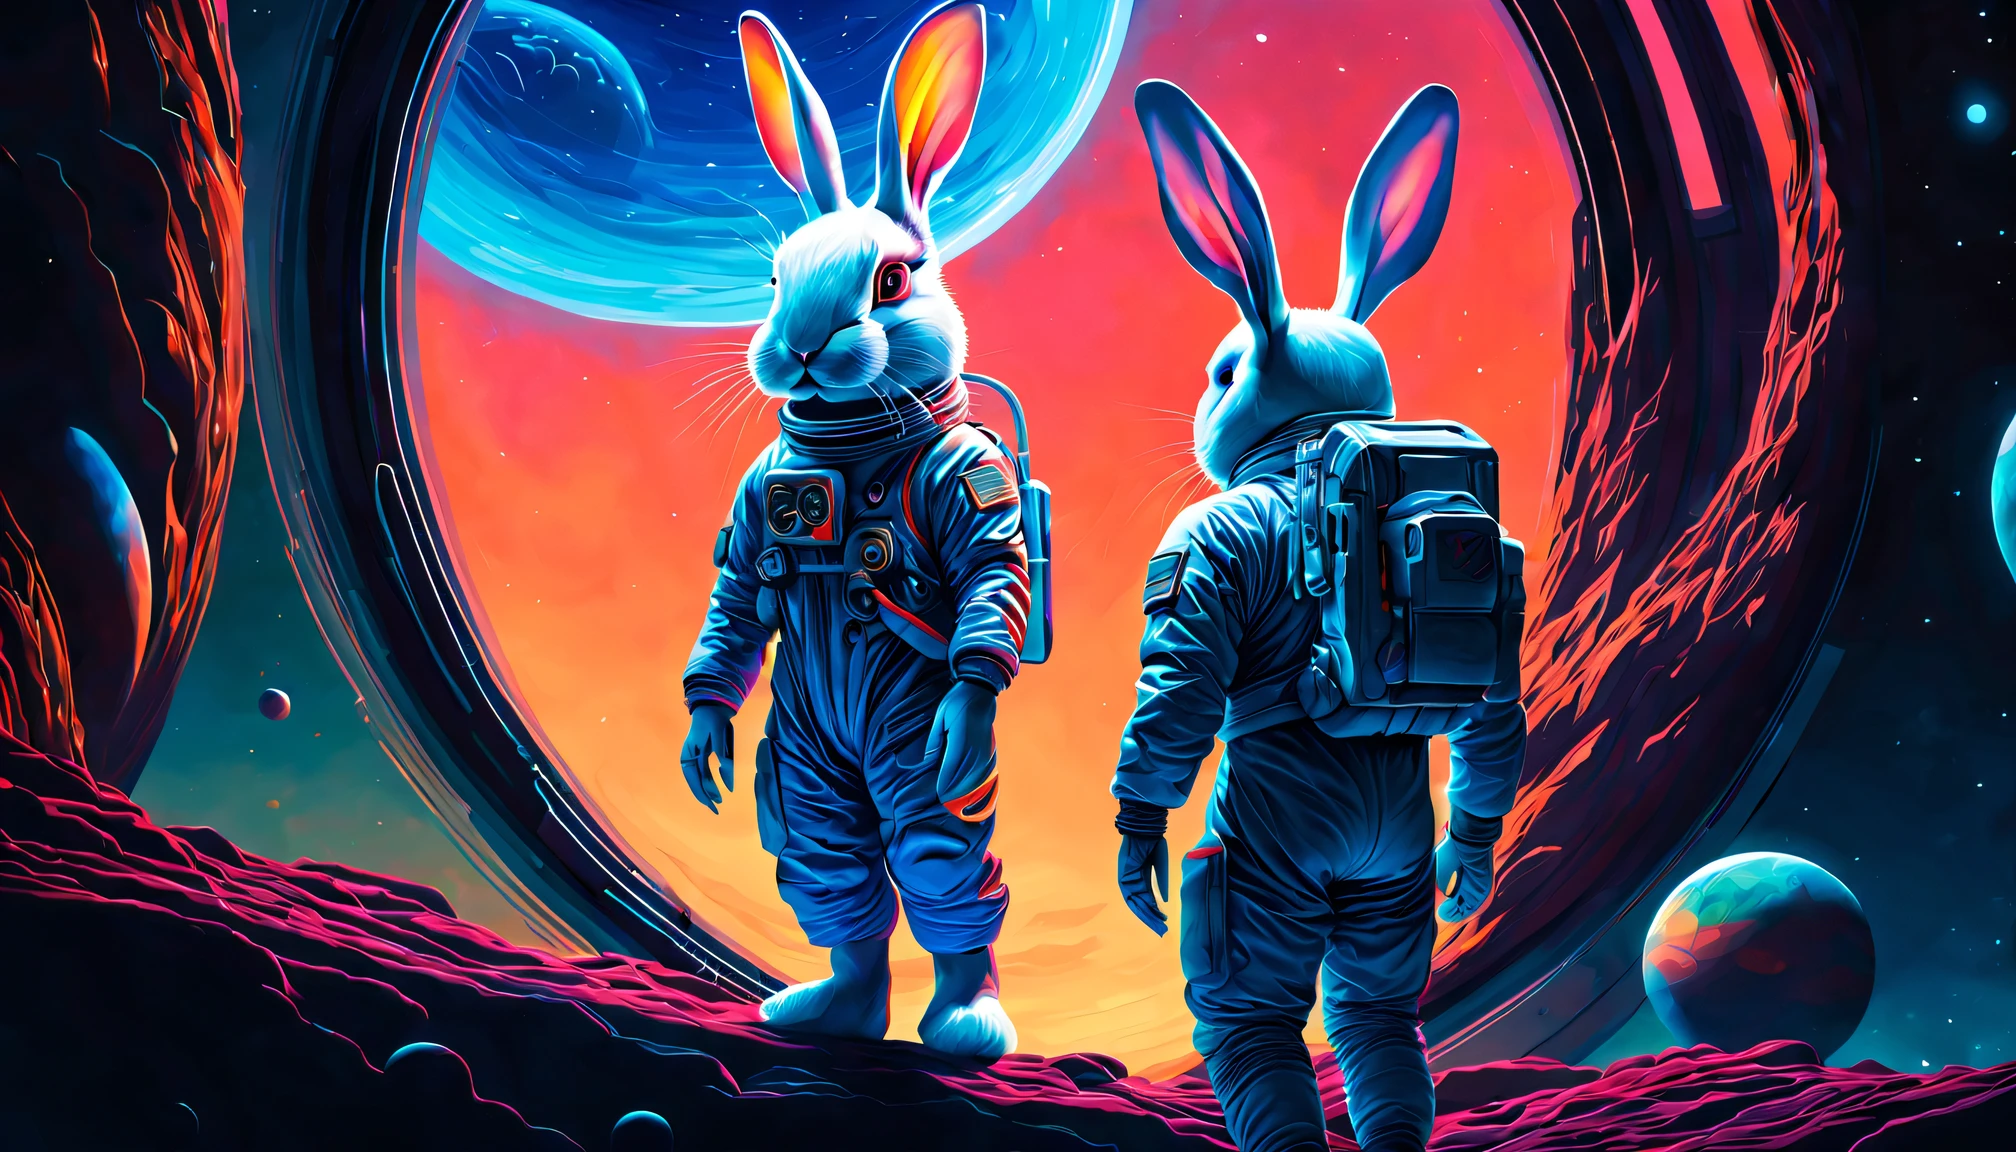 oil painted，(((A bioluminescent rabbit))), horrified expression, Dressed in a high-tech spacesuit,  Stand on the windowsill，Look at the Earth with a space background in front of you, Post-apocalyptic background style, Bright warm colors, Movie poster, Compelling documentary photographs, Earthworks, metallic rotation, IMAX, 21st century, The man in the spacesuit is gone & Wander through a landscape surrounded by planets, In the style of Imax, Anna Dietman, Alexey Briklot, Alex Colville, centered image, hyper detailed illustration, posing on a, (Four colors), Whimsical, Enchanting, children's storybook, (ink lines:1.1), strong outline, art by mschiffer, Bold markers, unframed, High contrast, (cel-shaded:1.1), vectorial, 32K resolution, Best quality, Flat colors, Flat lights. The fusion of art and mathematics, ultra - detailed, trending on art station, Sharp focus, Studio photography, intricately details, Highly detailed, Centered, perfectly symmetrical,